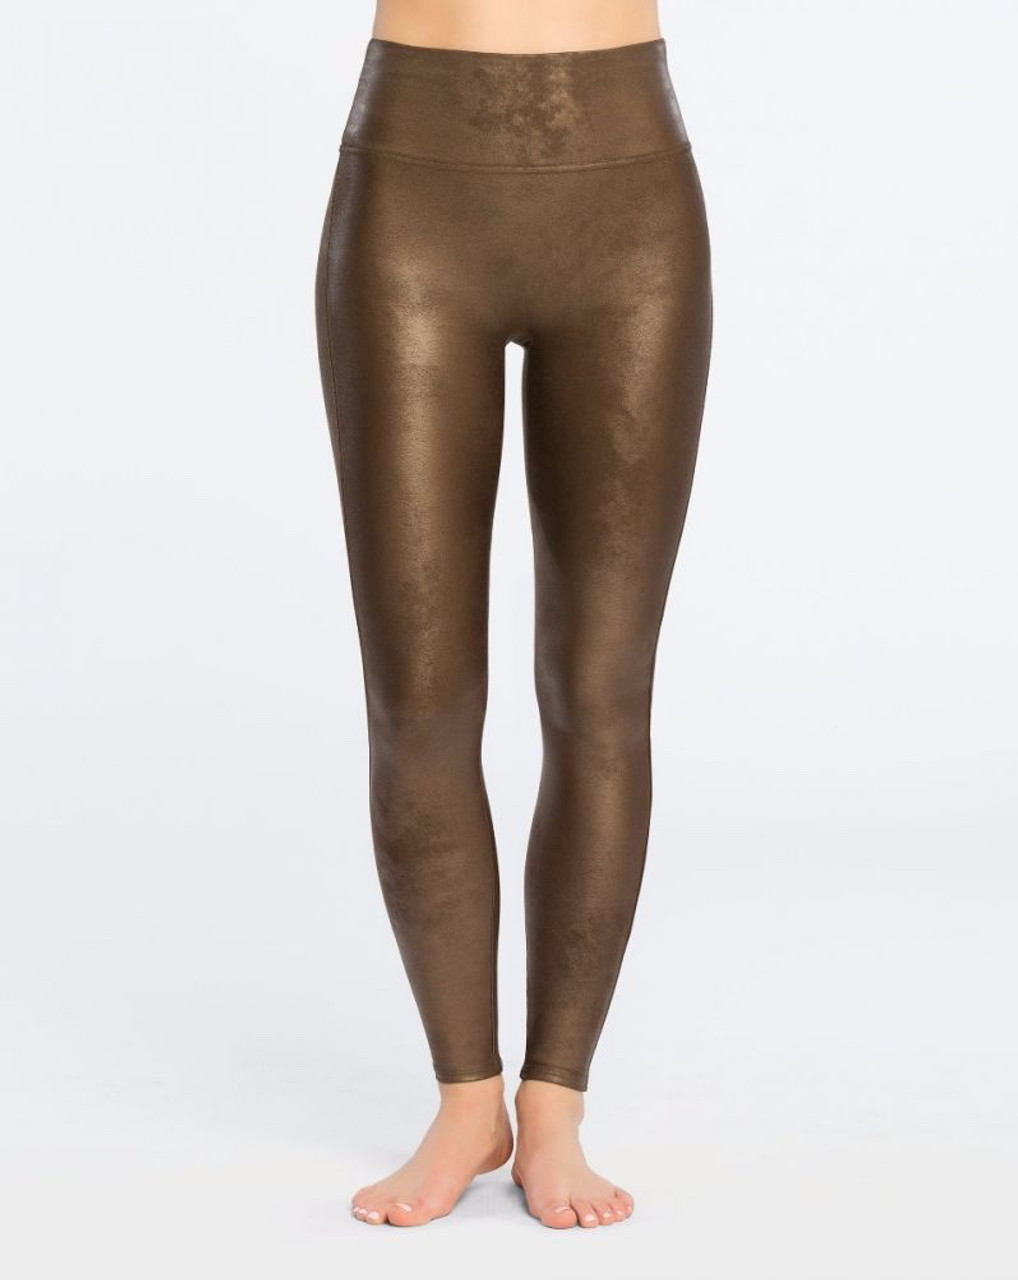 Shop /Pants SPANX Ready To Wow - Faux Leather Leggings Discounted Price $98